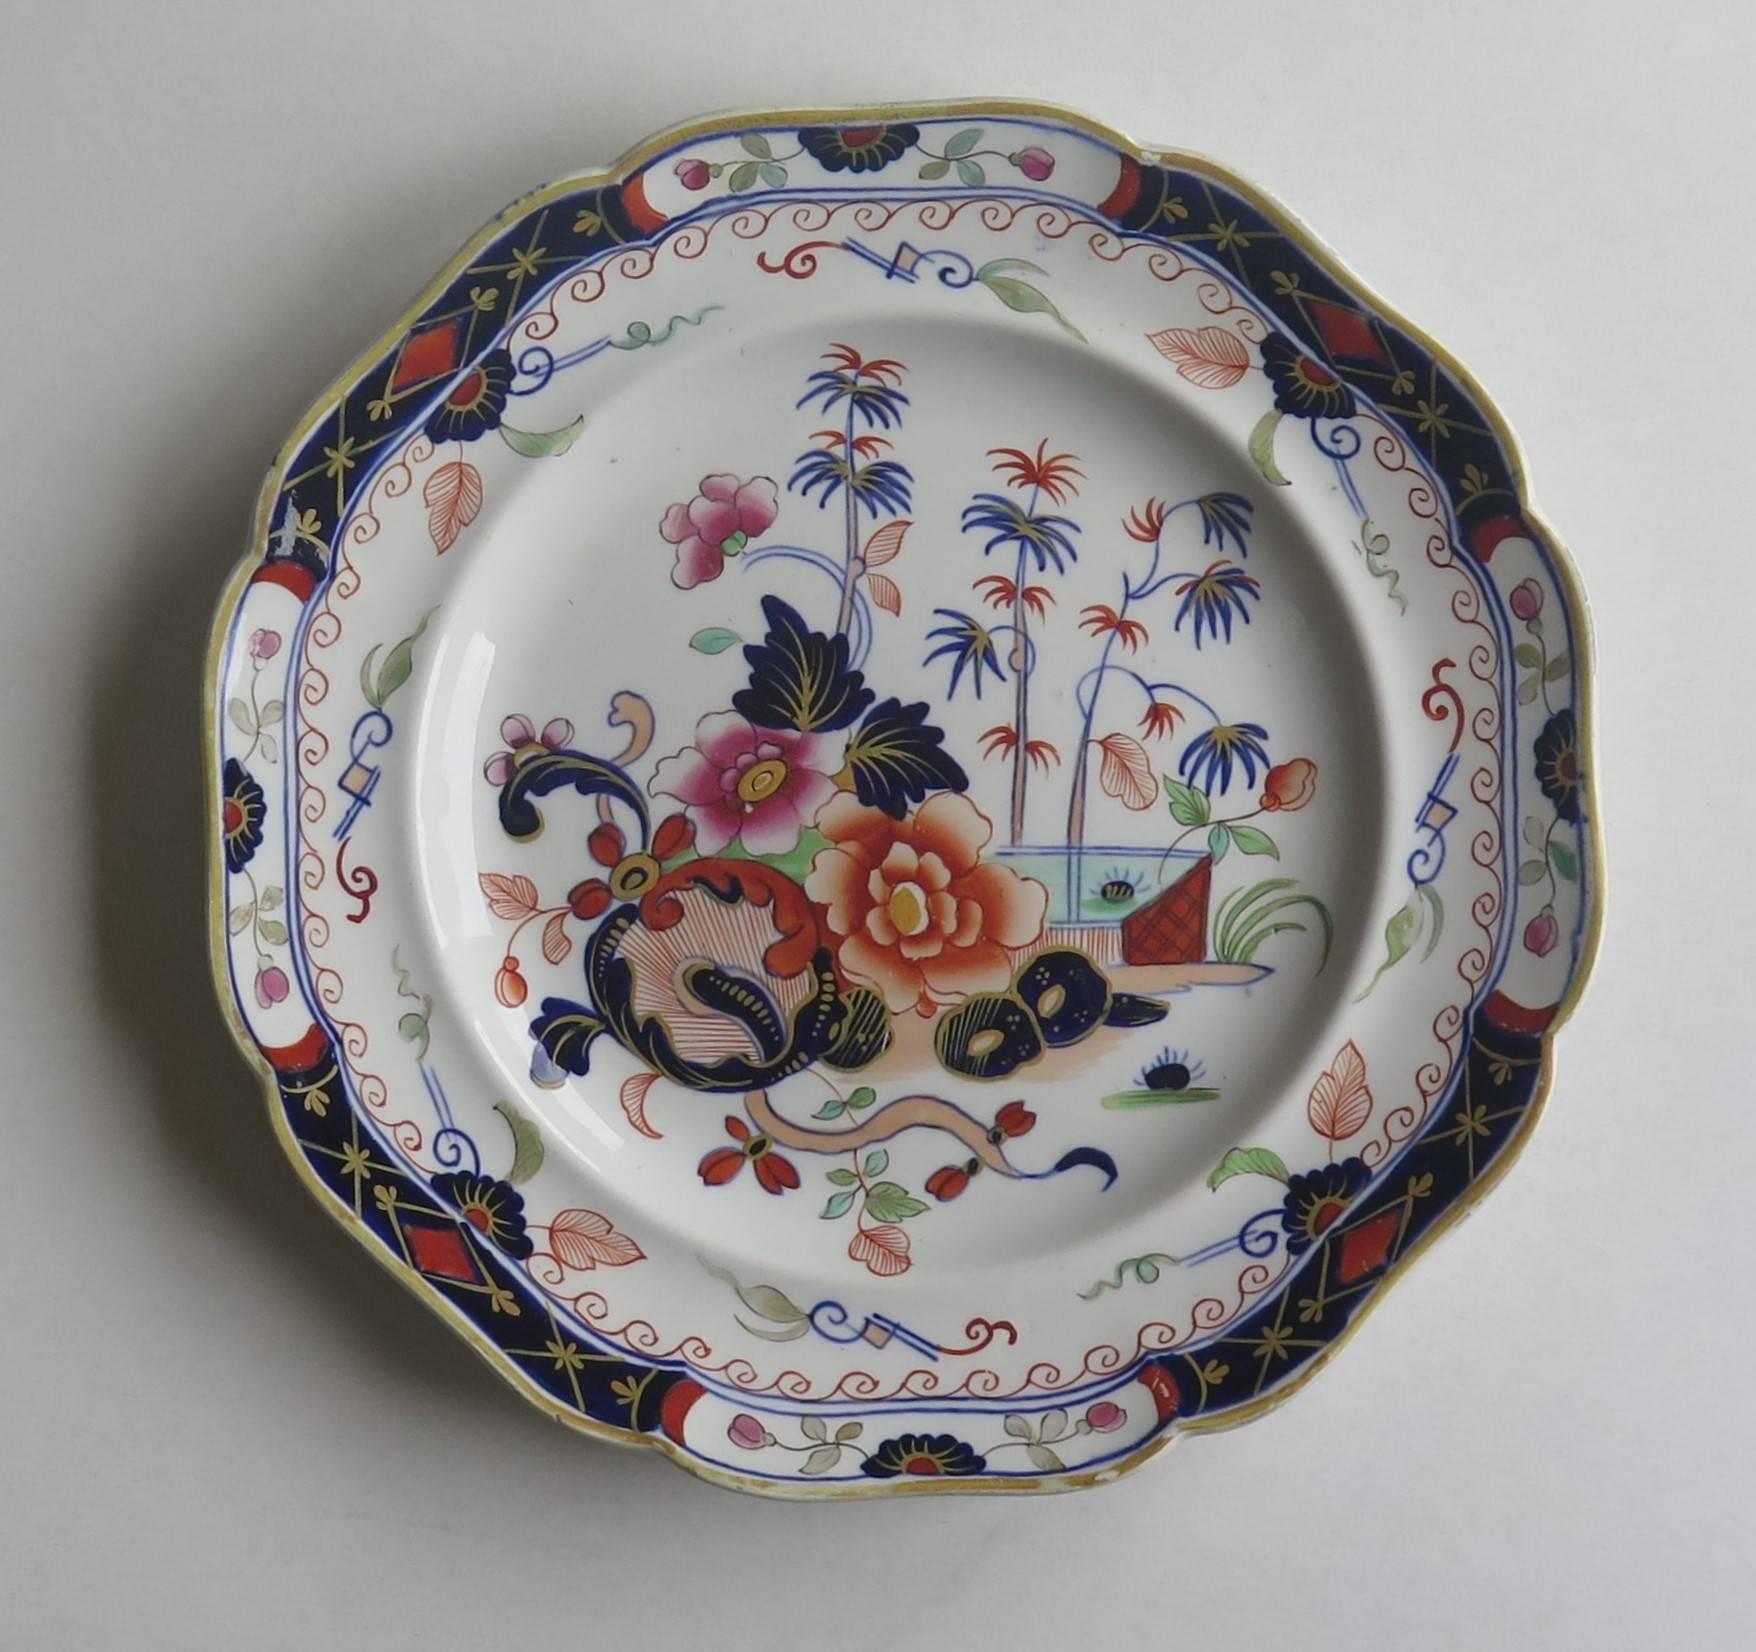 This is a highly decorative, superior stone China (ironstone), plate by John Ridgway, dating to the William IVth period of the 19th century.

The plate has been carefully hand-painted in bold colorful enamels with a central Chinoiserie pattern with